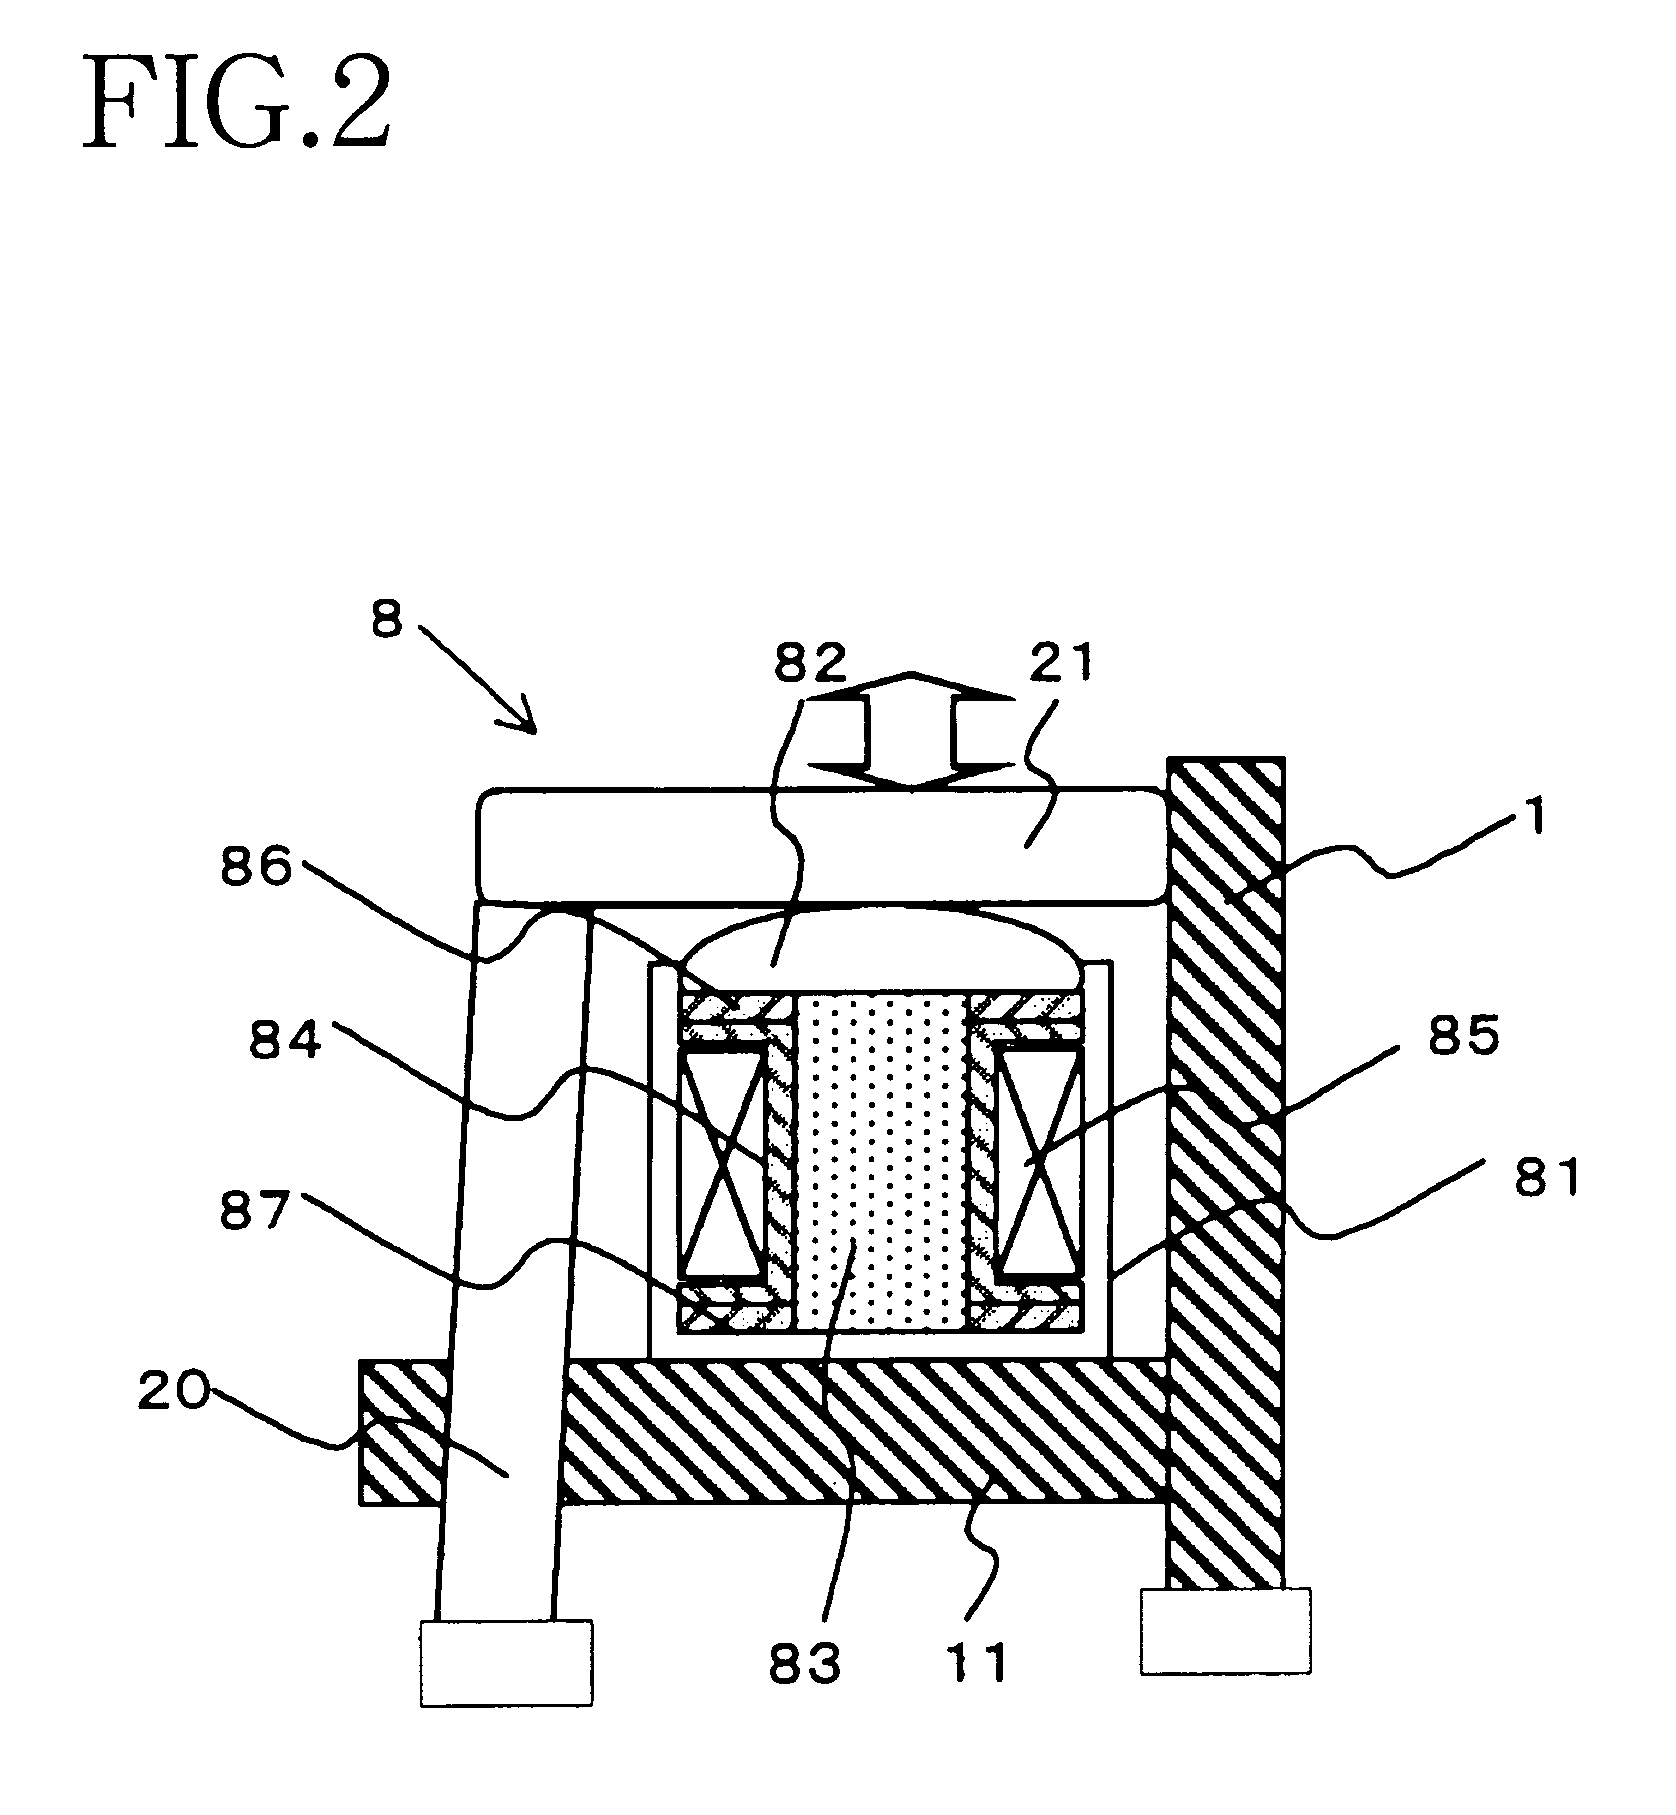 Load detecting system and automatic washing machine equipped with a system for detecting the magnitude of the load acting on a magnetostrictive element